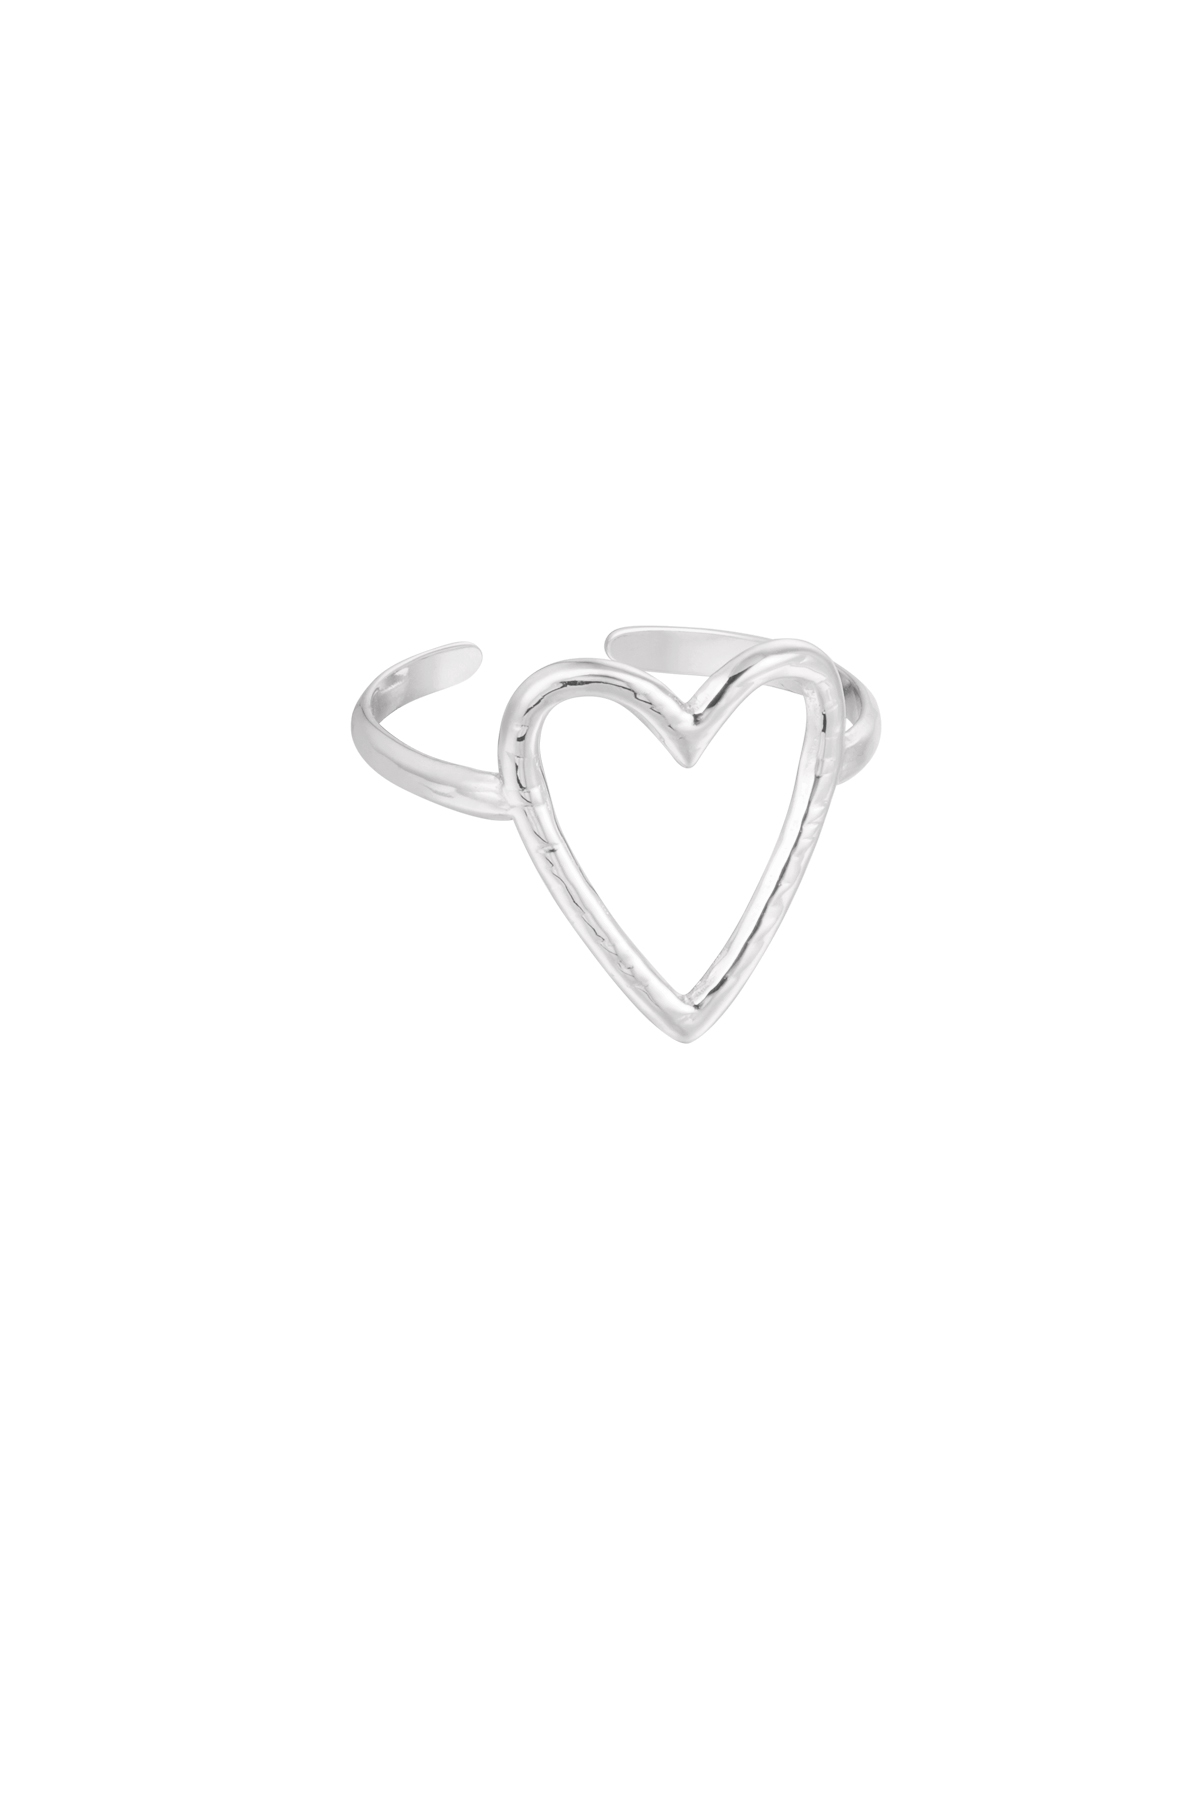 Ring big heart - silver h5 